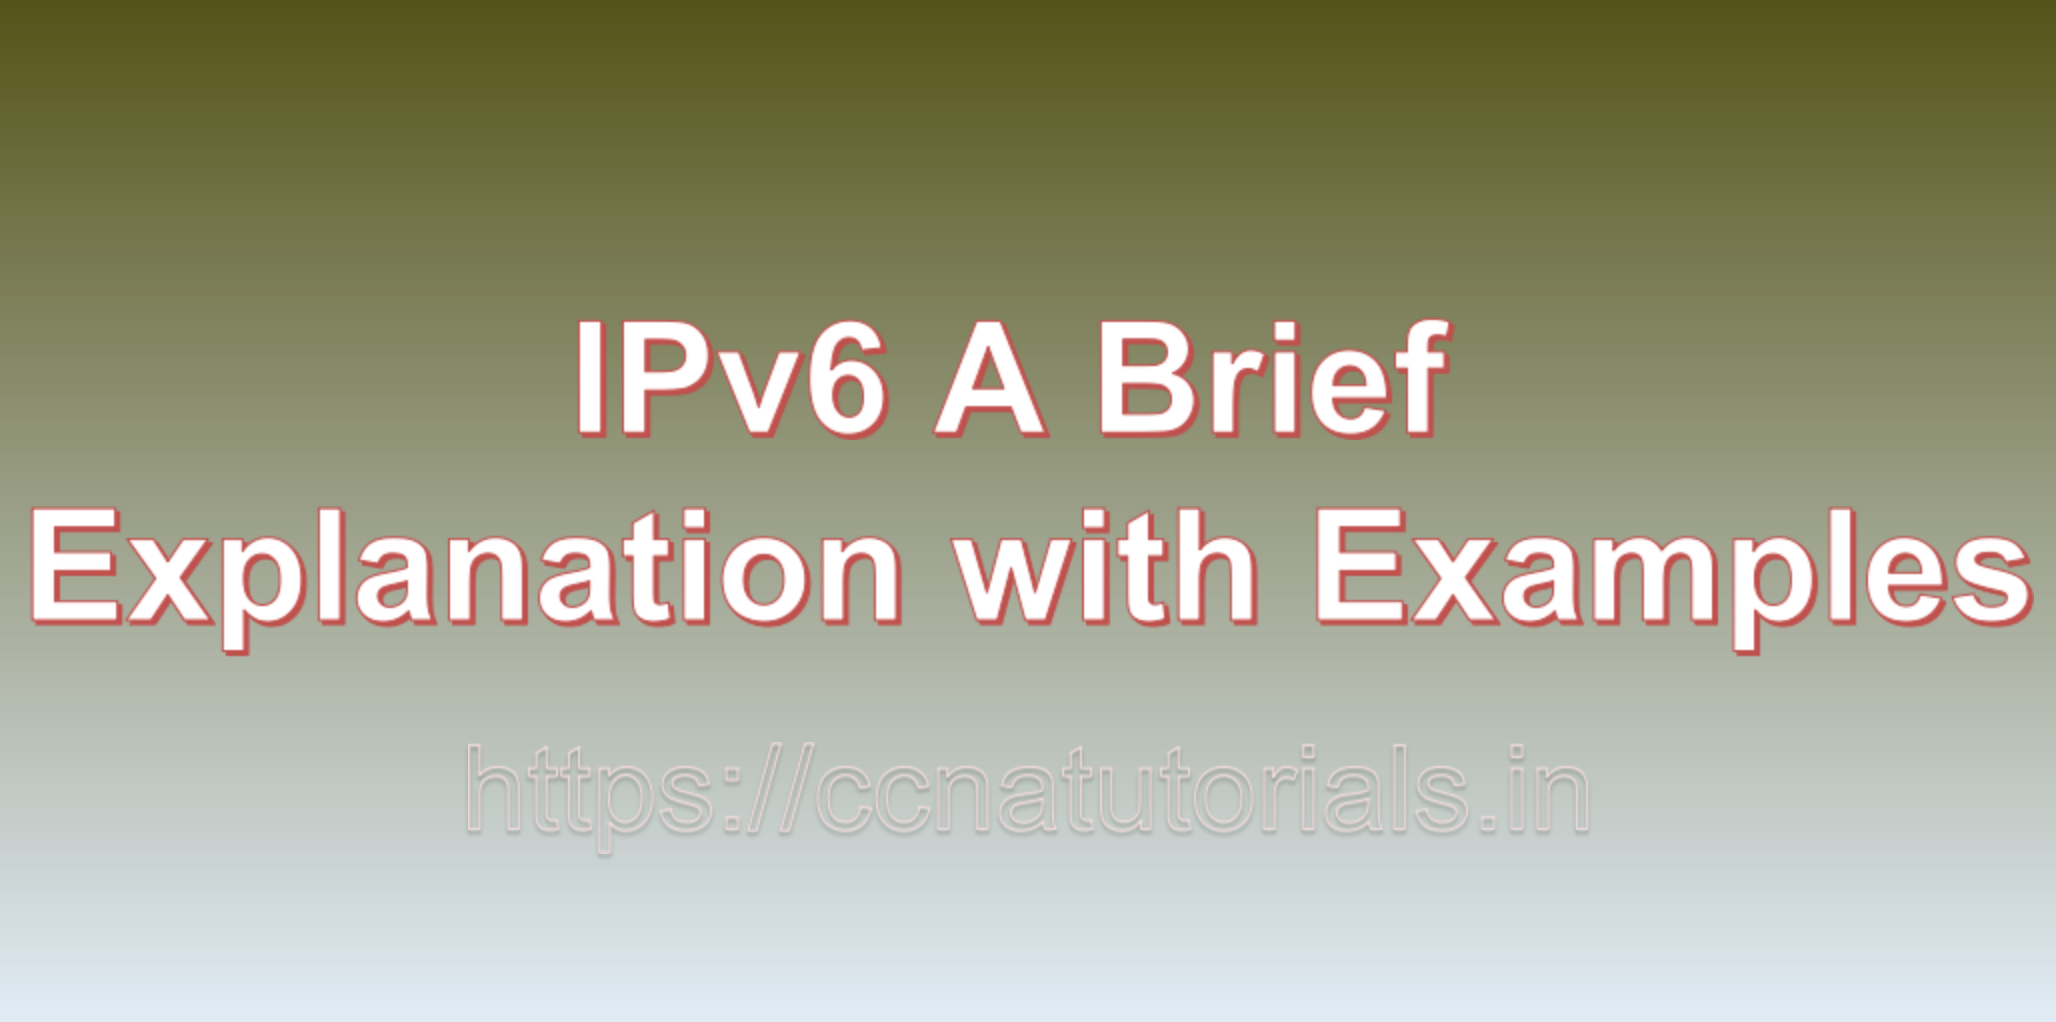 IPV6 a brief explanation with examples, ipv6 in brief